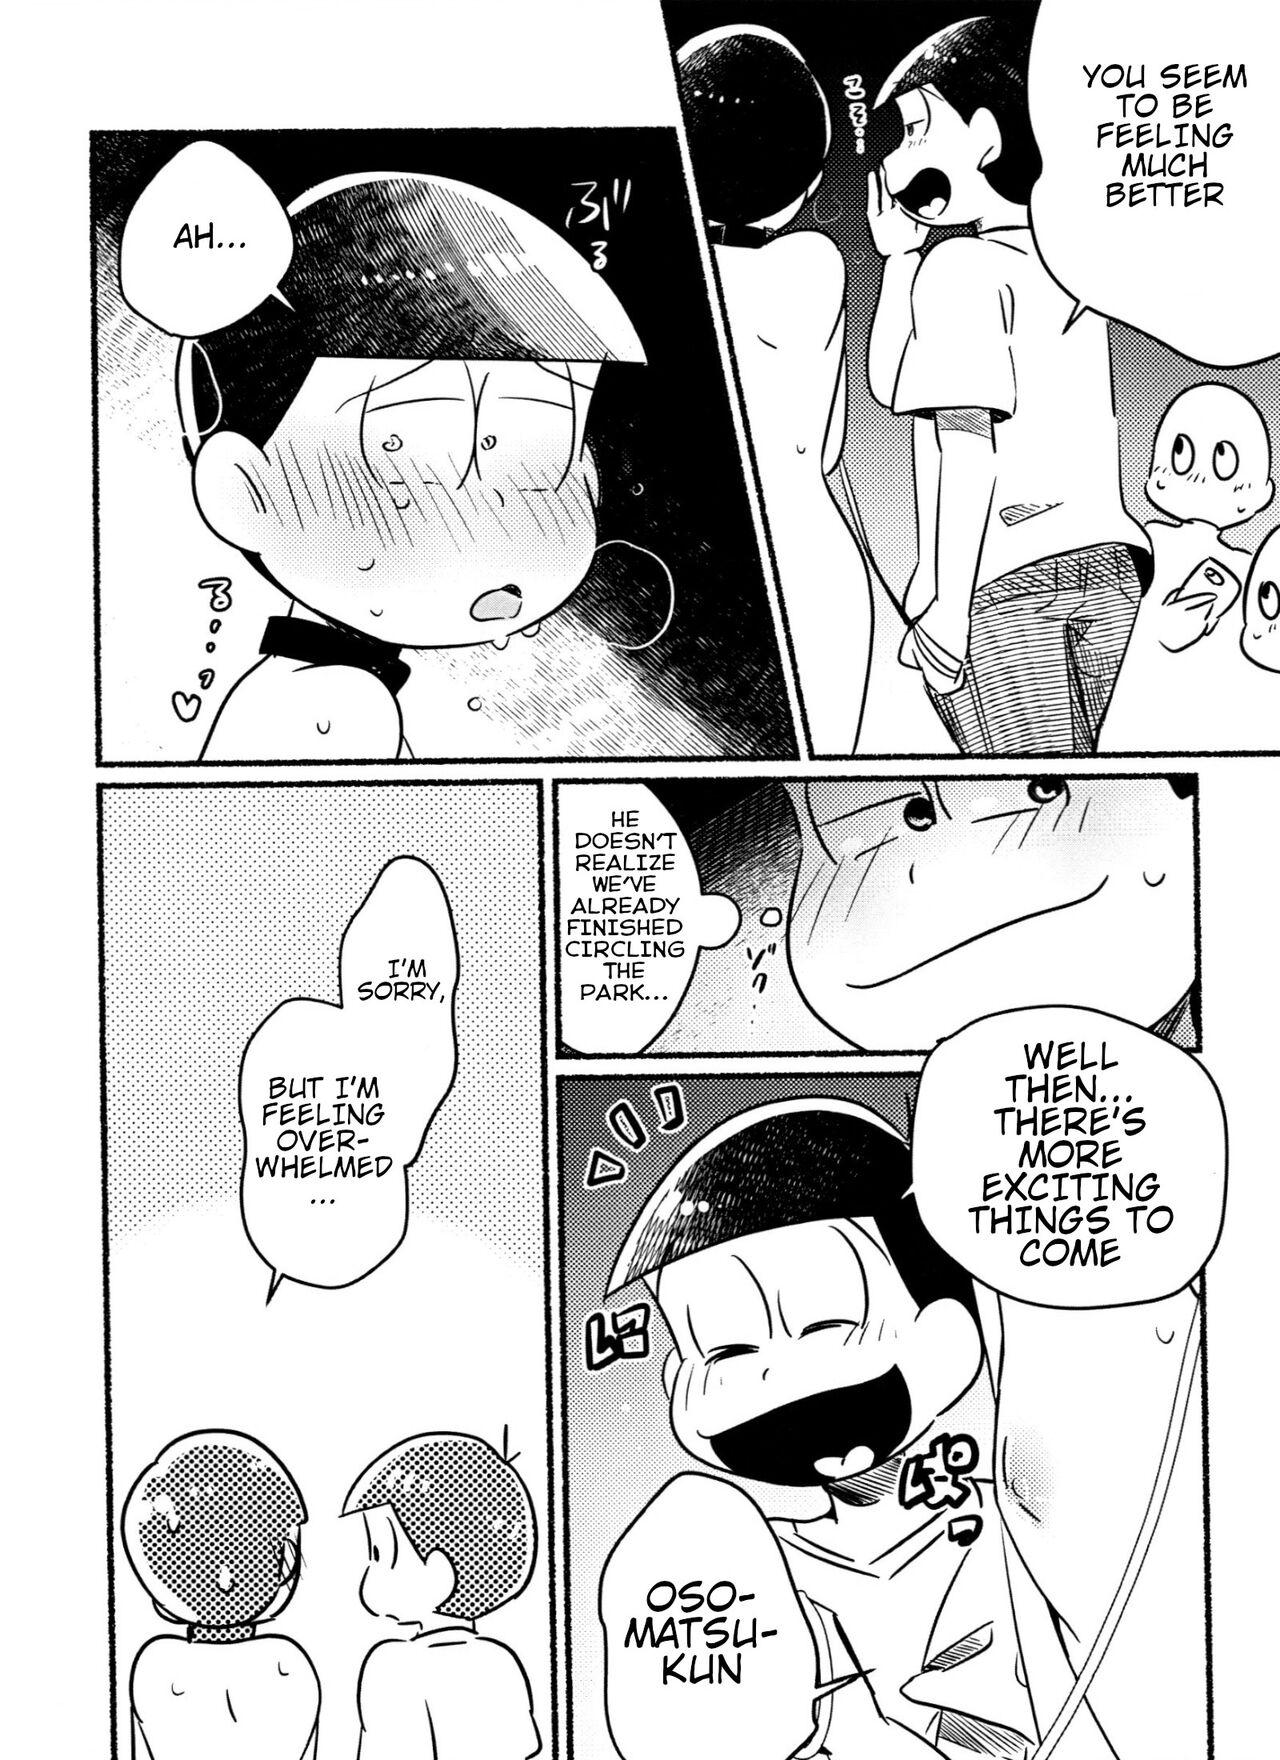 Adult Inspector Choromatsu walks naked at night and does XXX in the public eye R18 book - Osomatsu san Seduction Porn - Page 11